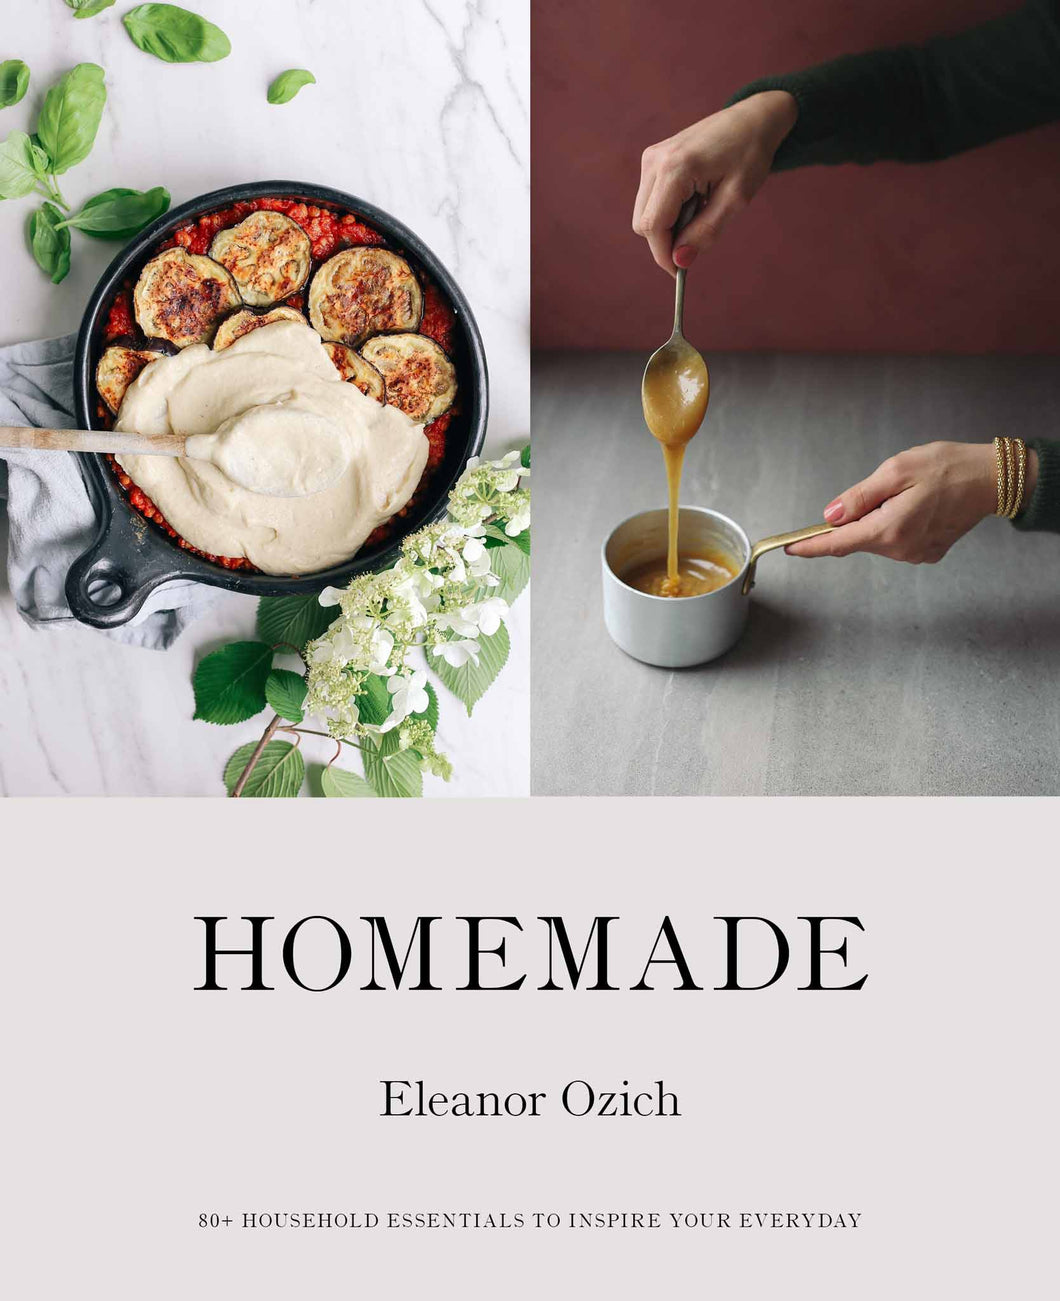 Homemade by Eleanor Ozich.